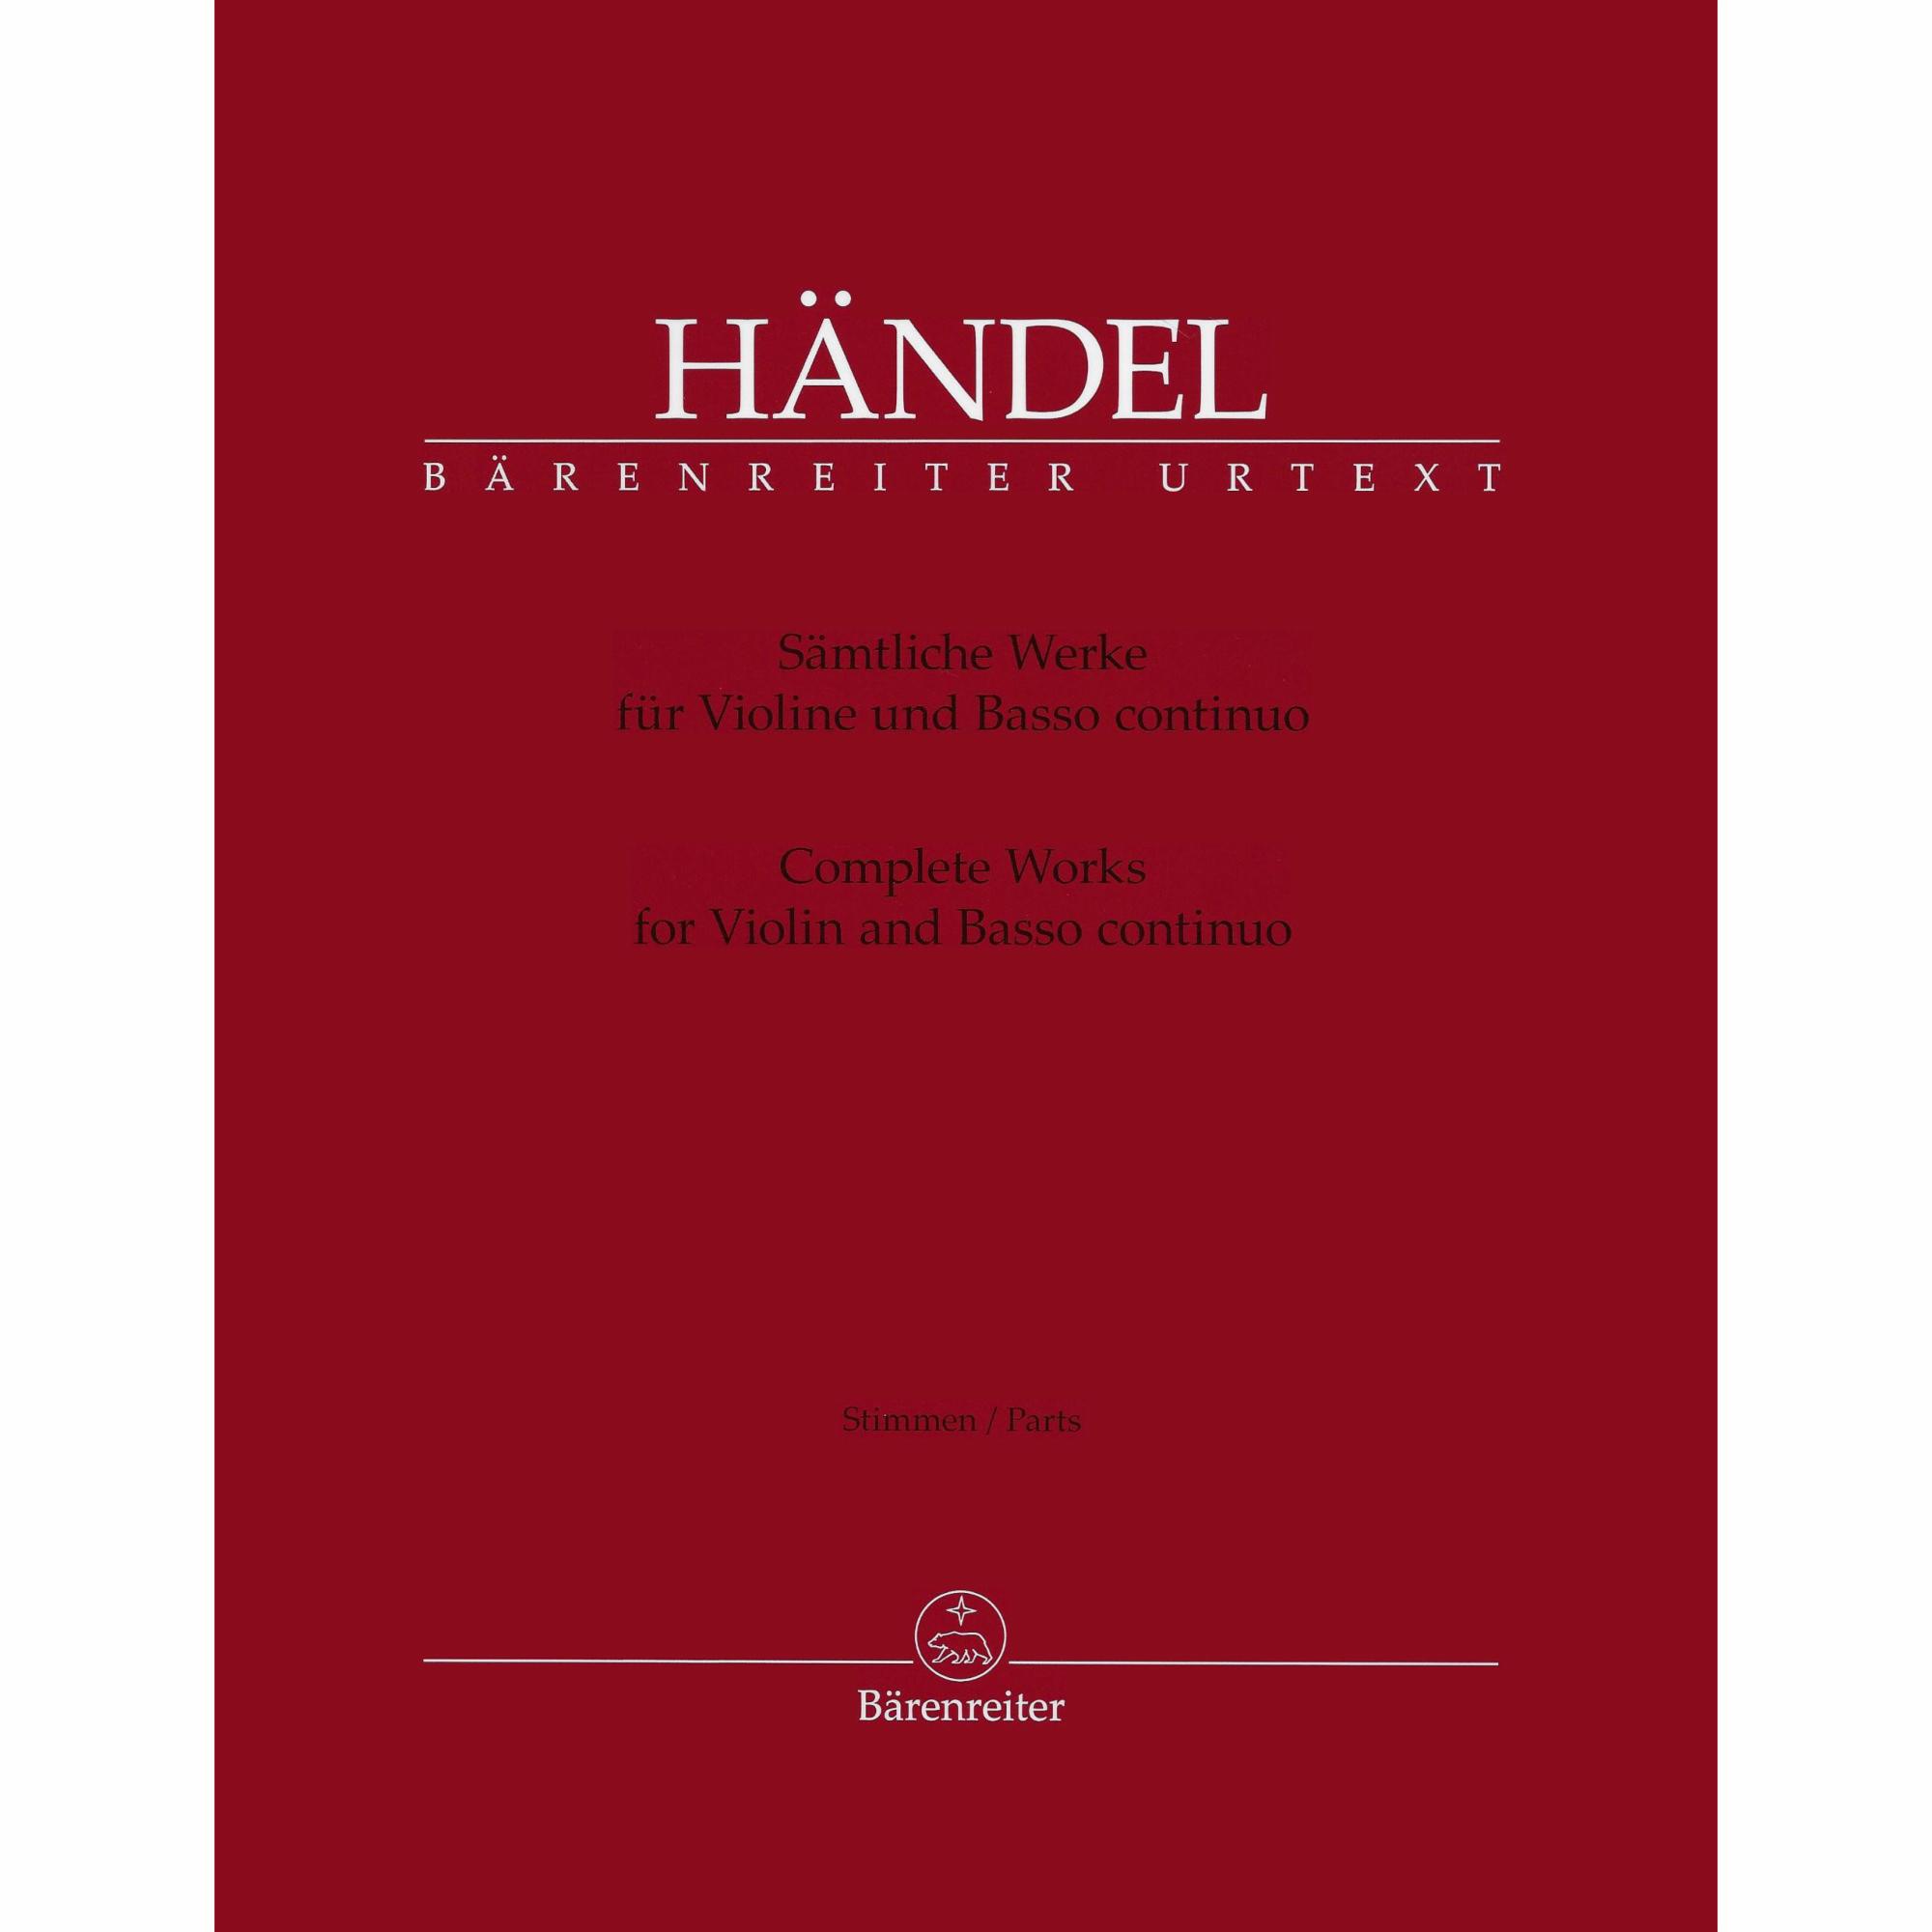 Handel -- Complete Works for Violin and Basso Continuo